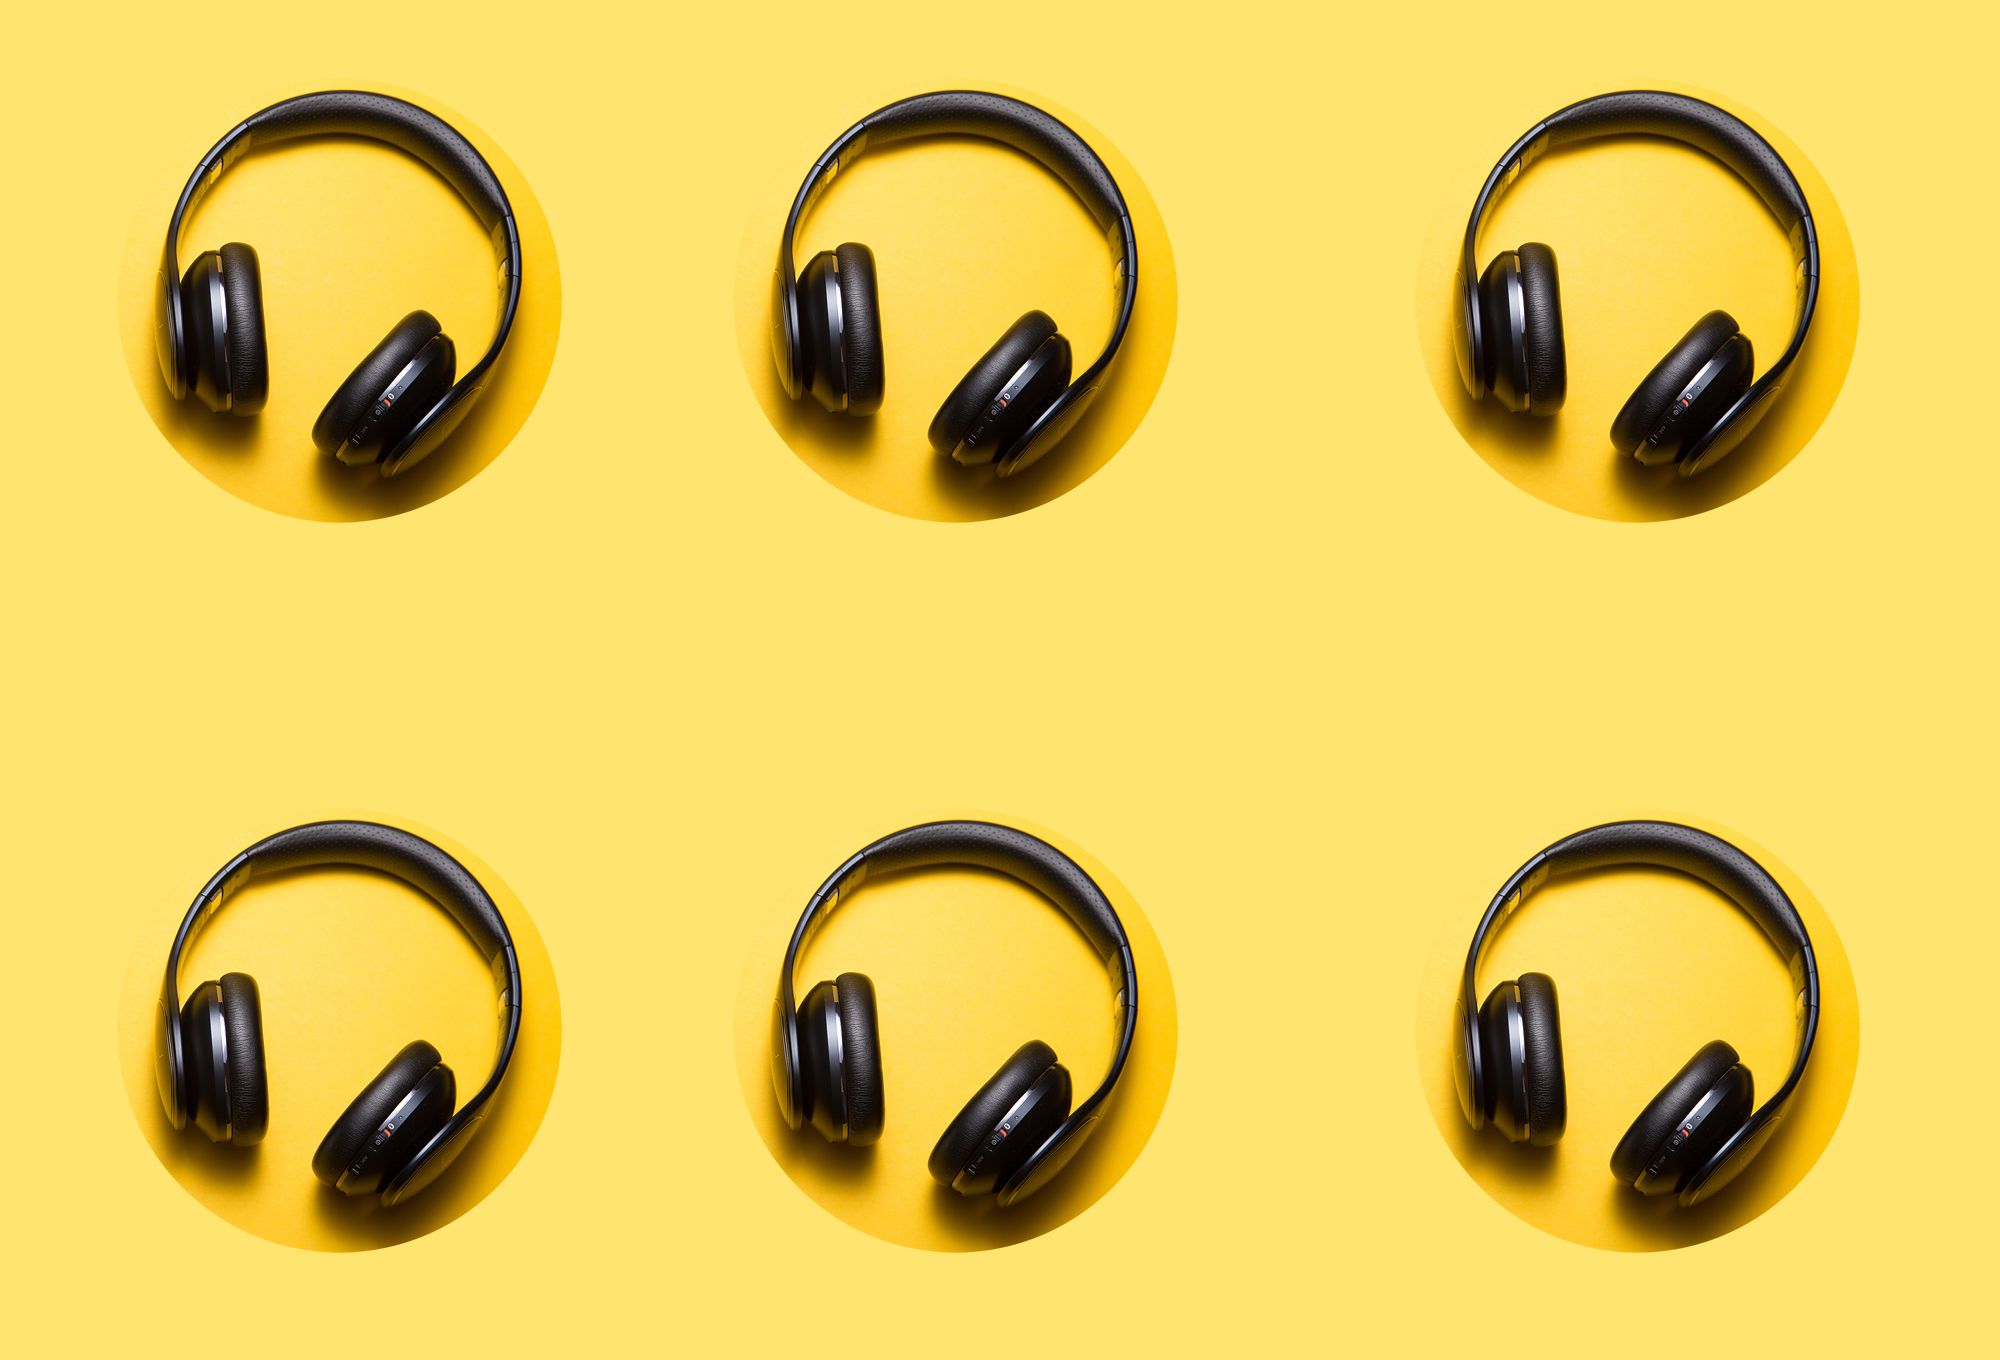 Repeat pattern of 6 black on ear headphones on yellow background